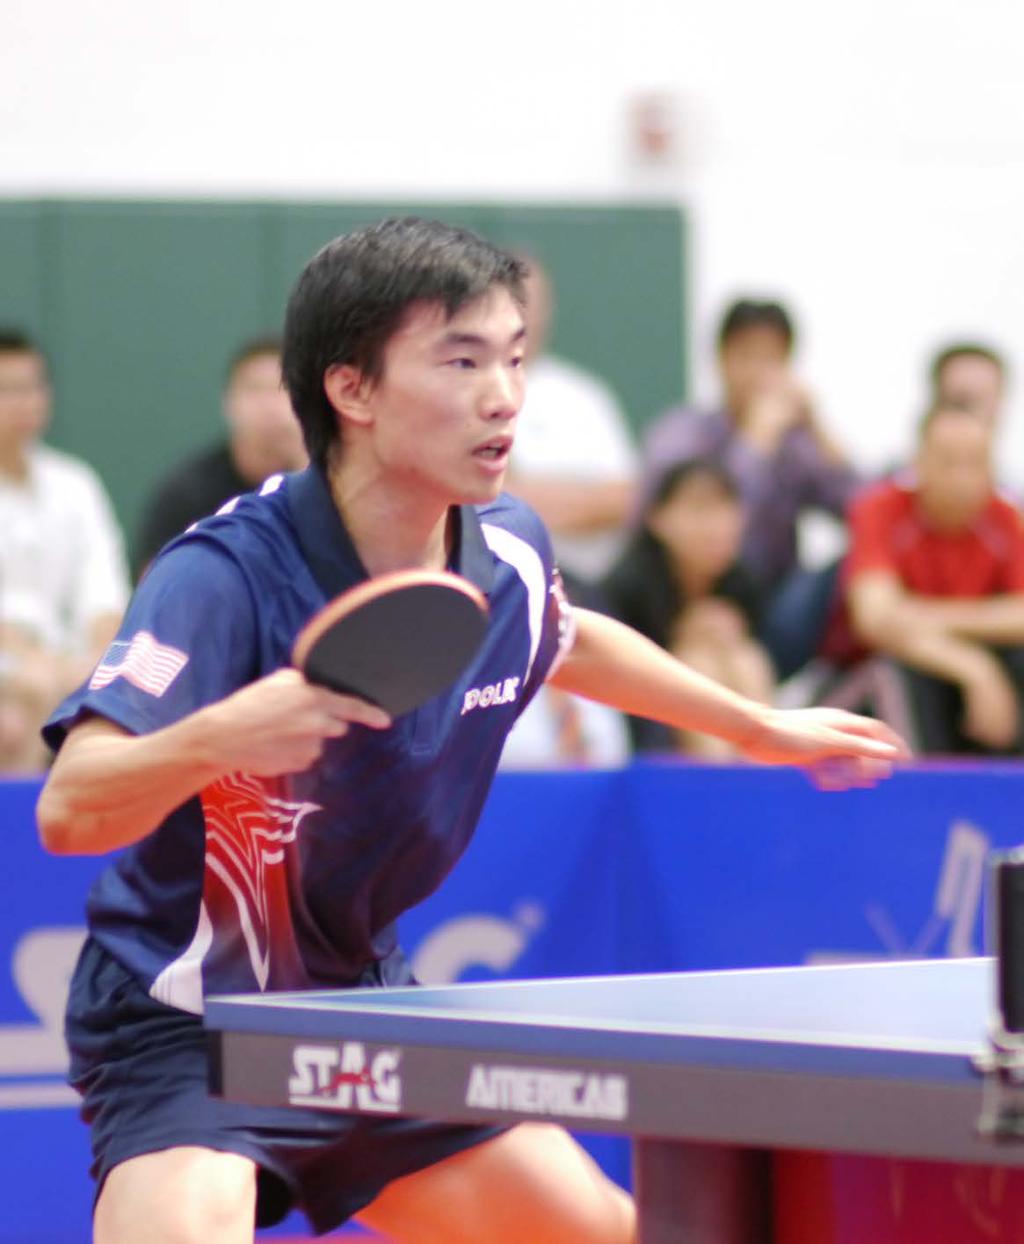 ITTF-NORTH AMERICA EVENTS EVENT 2: ITTF- NORTH AMERICA CHAMPIONSHIPS QUALIFICATION FOR THE ITTF WORLD TEAM CUP The ITTF-North America Championships consists of Teams and Individual events.